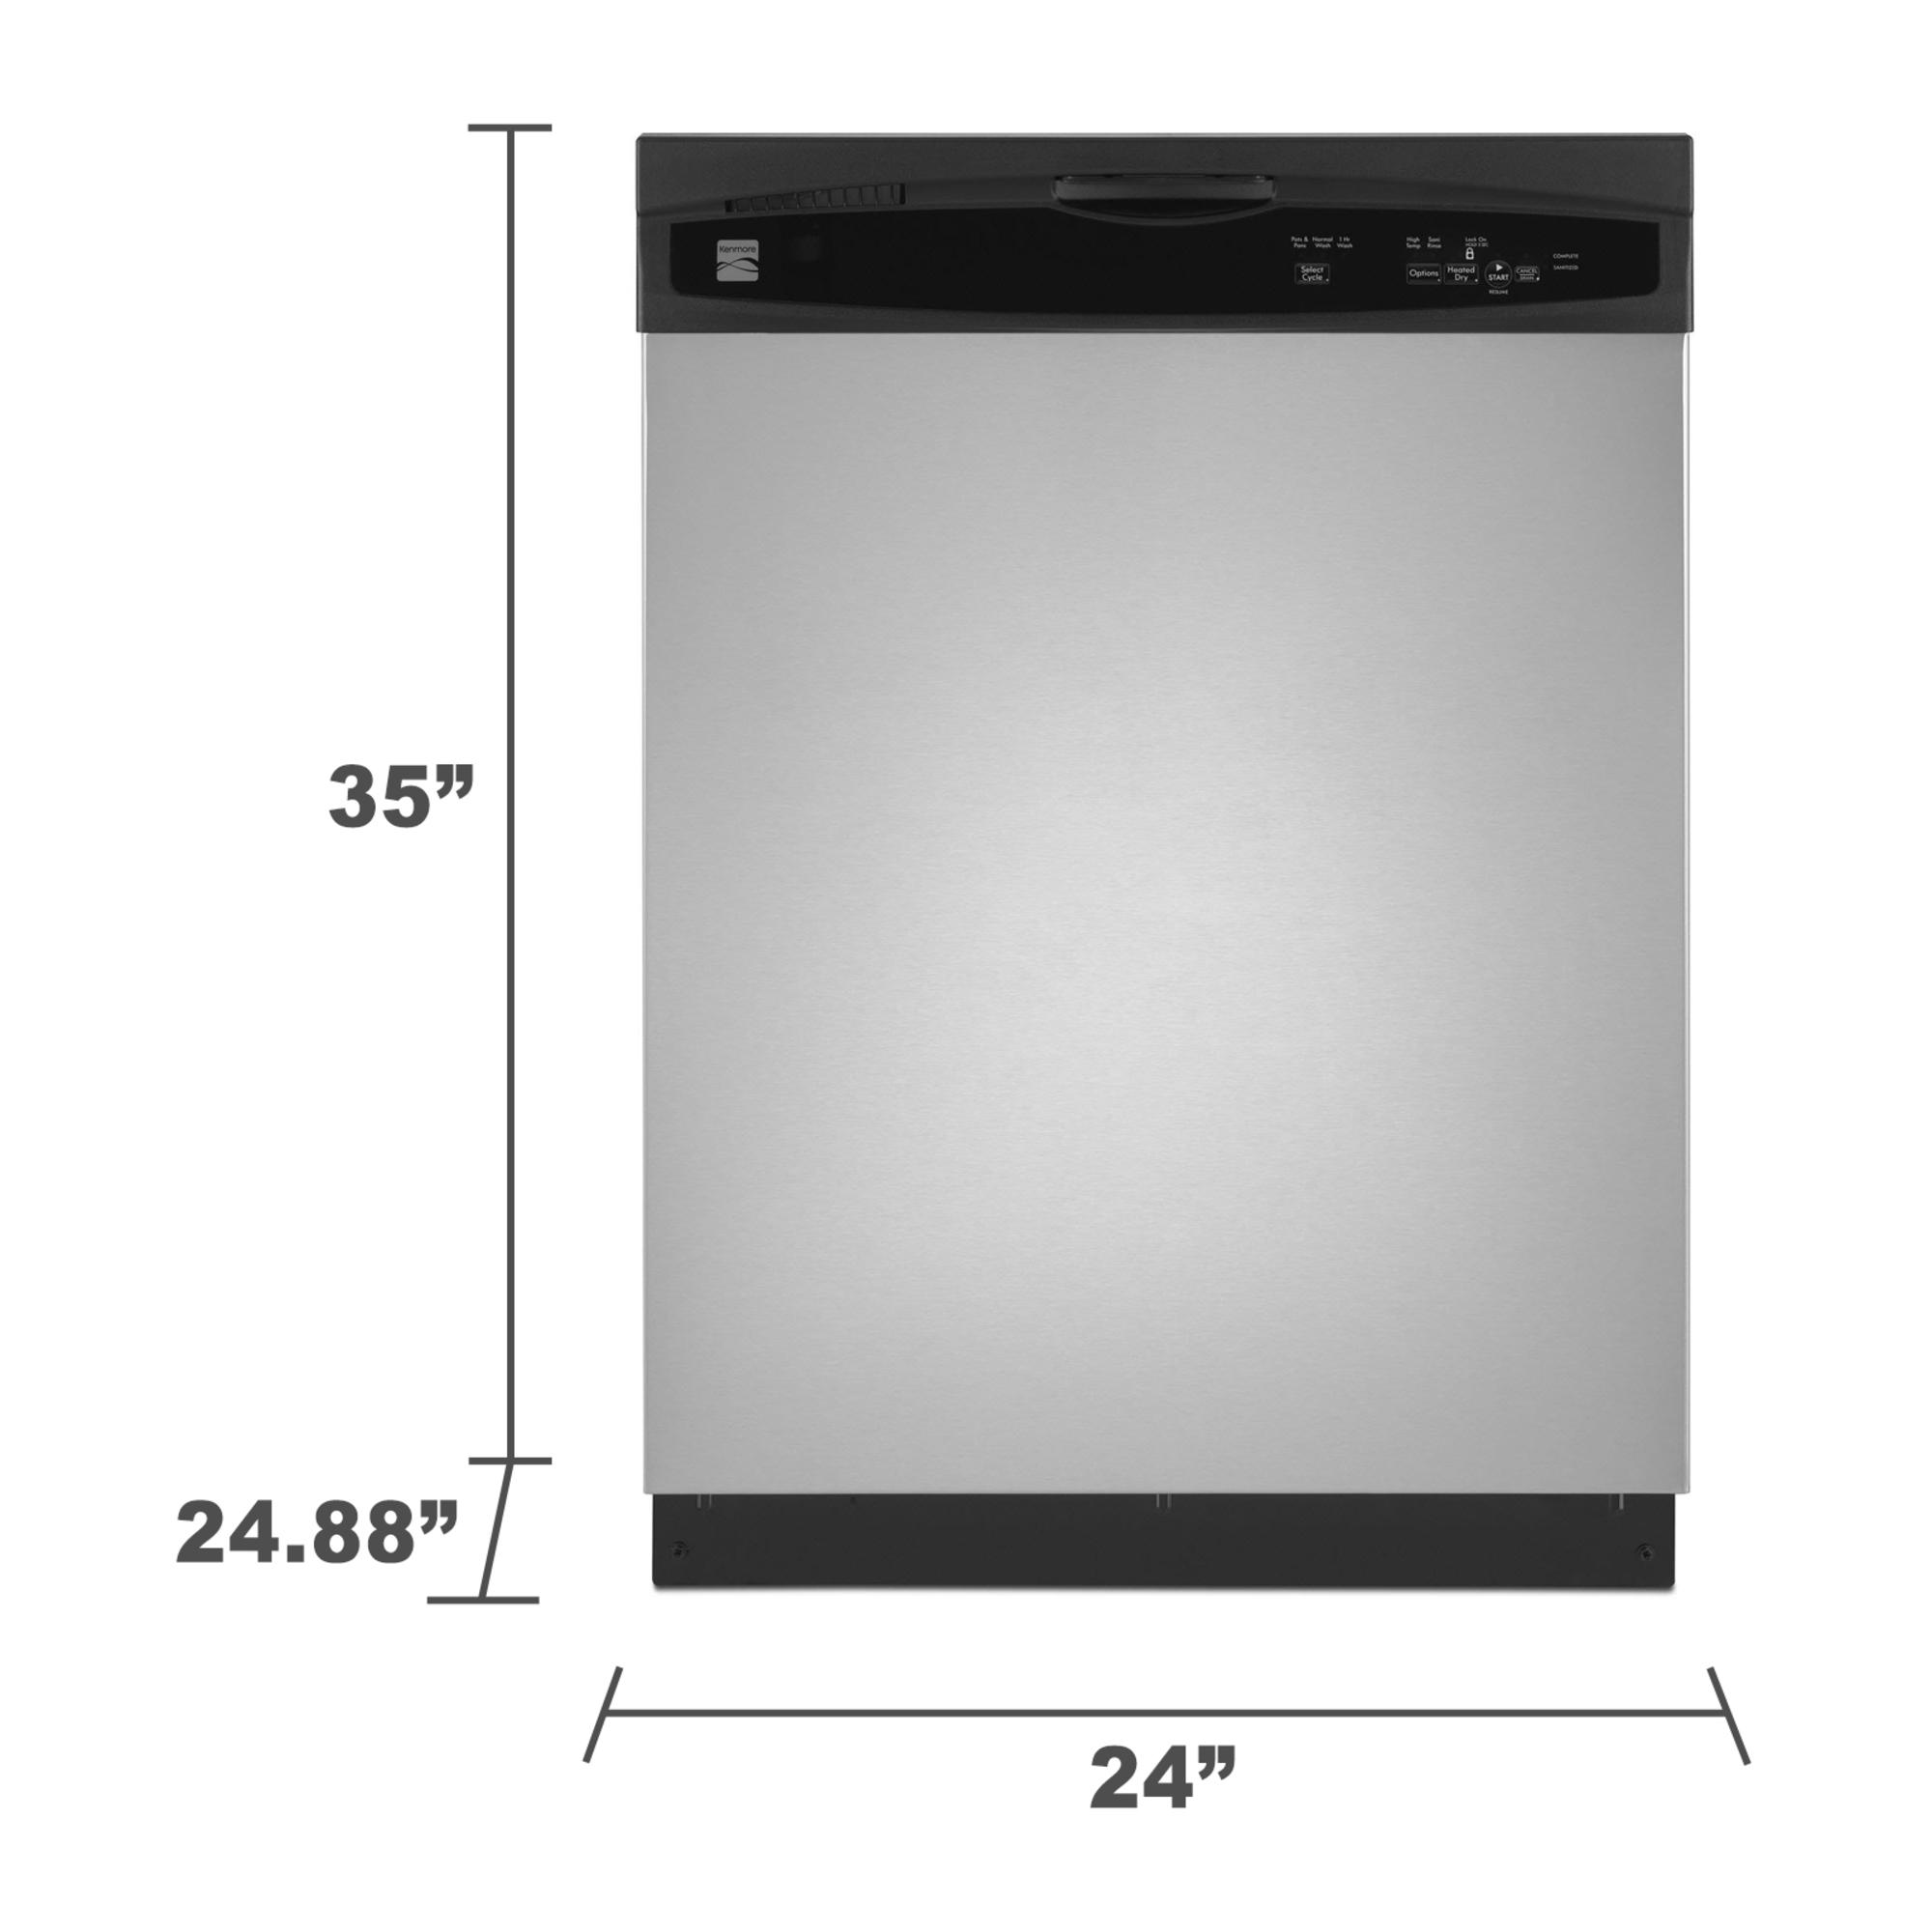 Kenmore 13003 24 Built In Dishwasher Stainless Steel